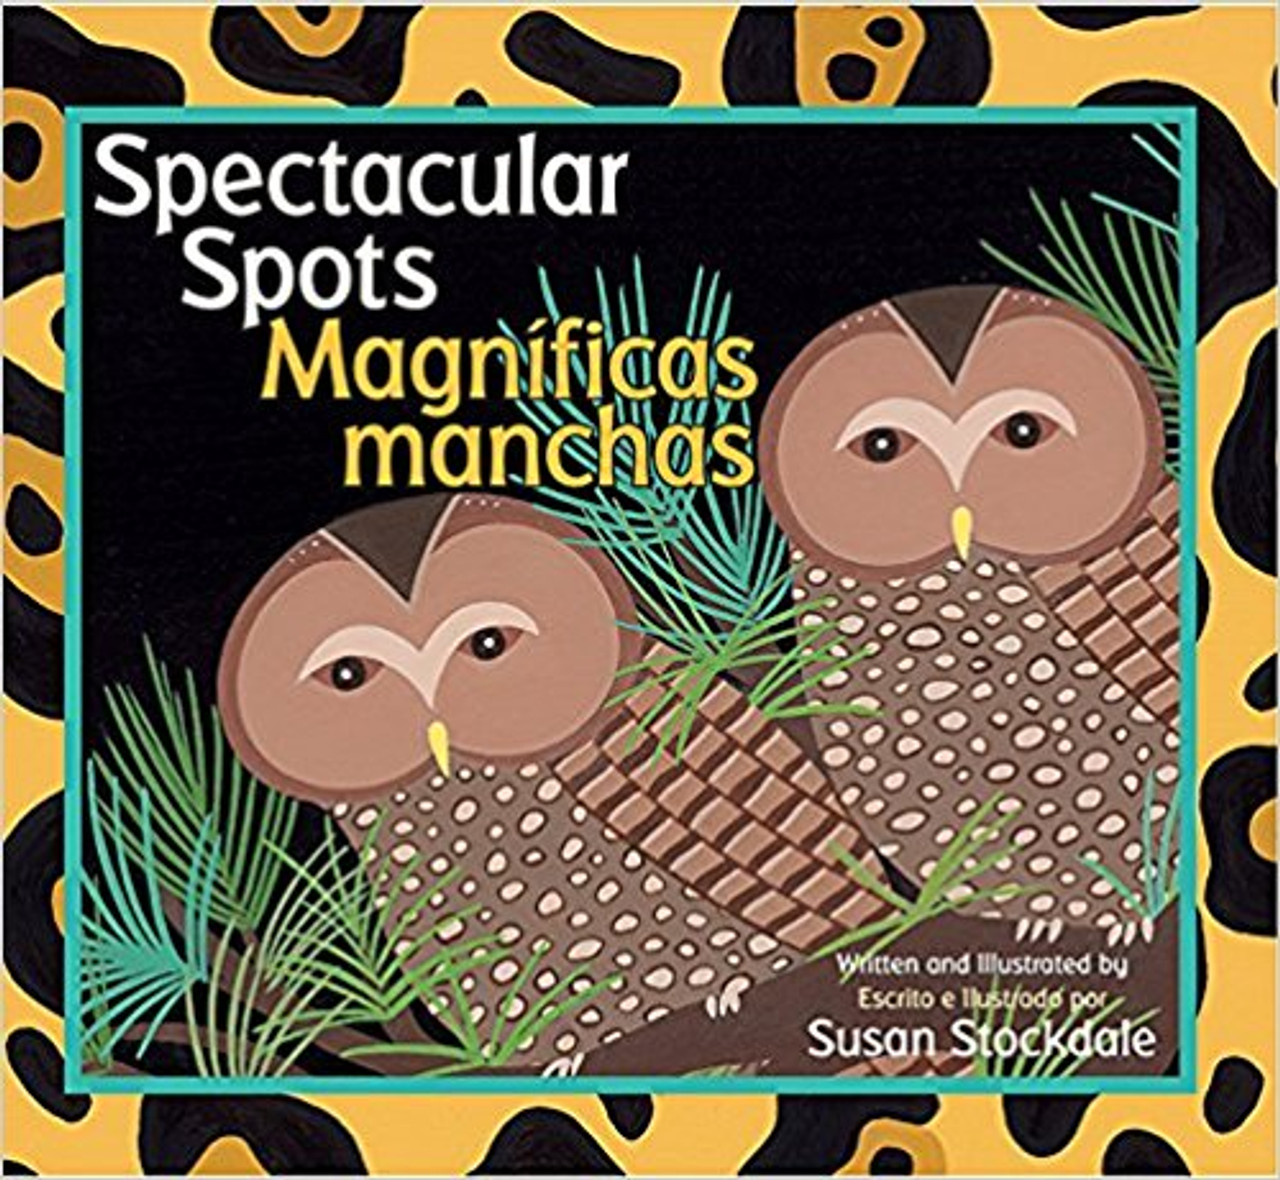 You'll be amazed to discover all the different reasons why animals have spots! What kinds of animals have spots, and why do they have them? To scare predators, hide more easily, or warn enemies to stay away? With engaging rhymes and bright, bold images, award-winning author and illustrator Susan Stockdale introduces young readers to the many ways in which animals benefit from their spots. Back matter tells a little bit more about each animal, and readers can test their knowledge of animal spots with a fun matching game at the end! Now available in a bilingual English/Spanish paperback.